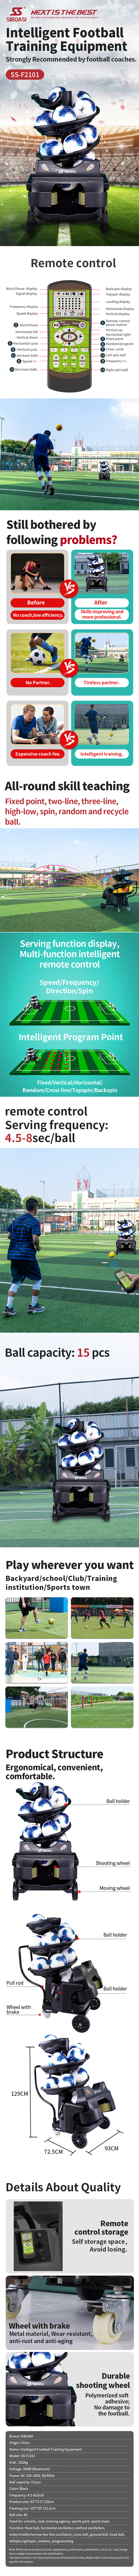 inexpensive soccer ball thrower machine for home use